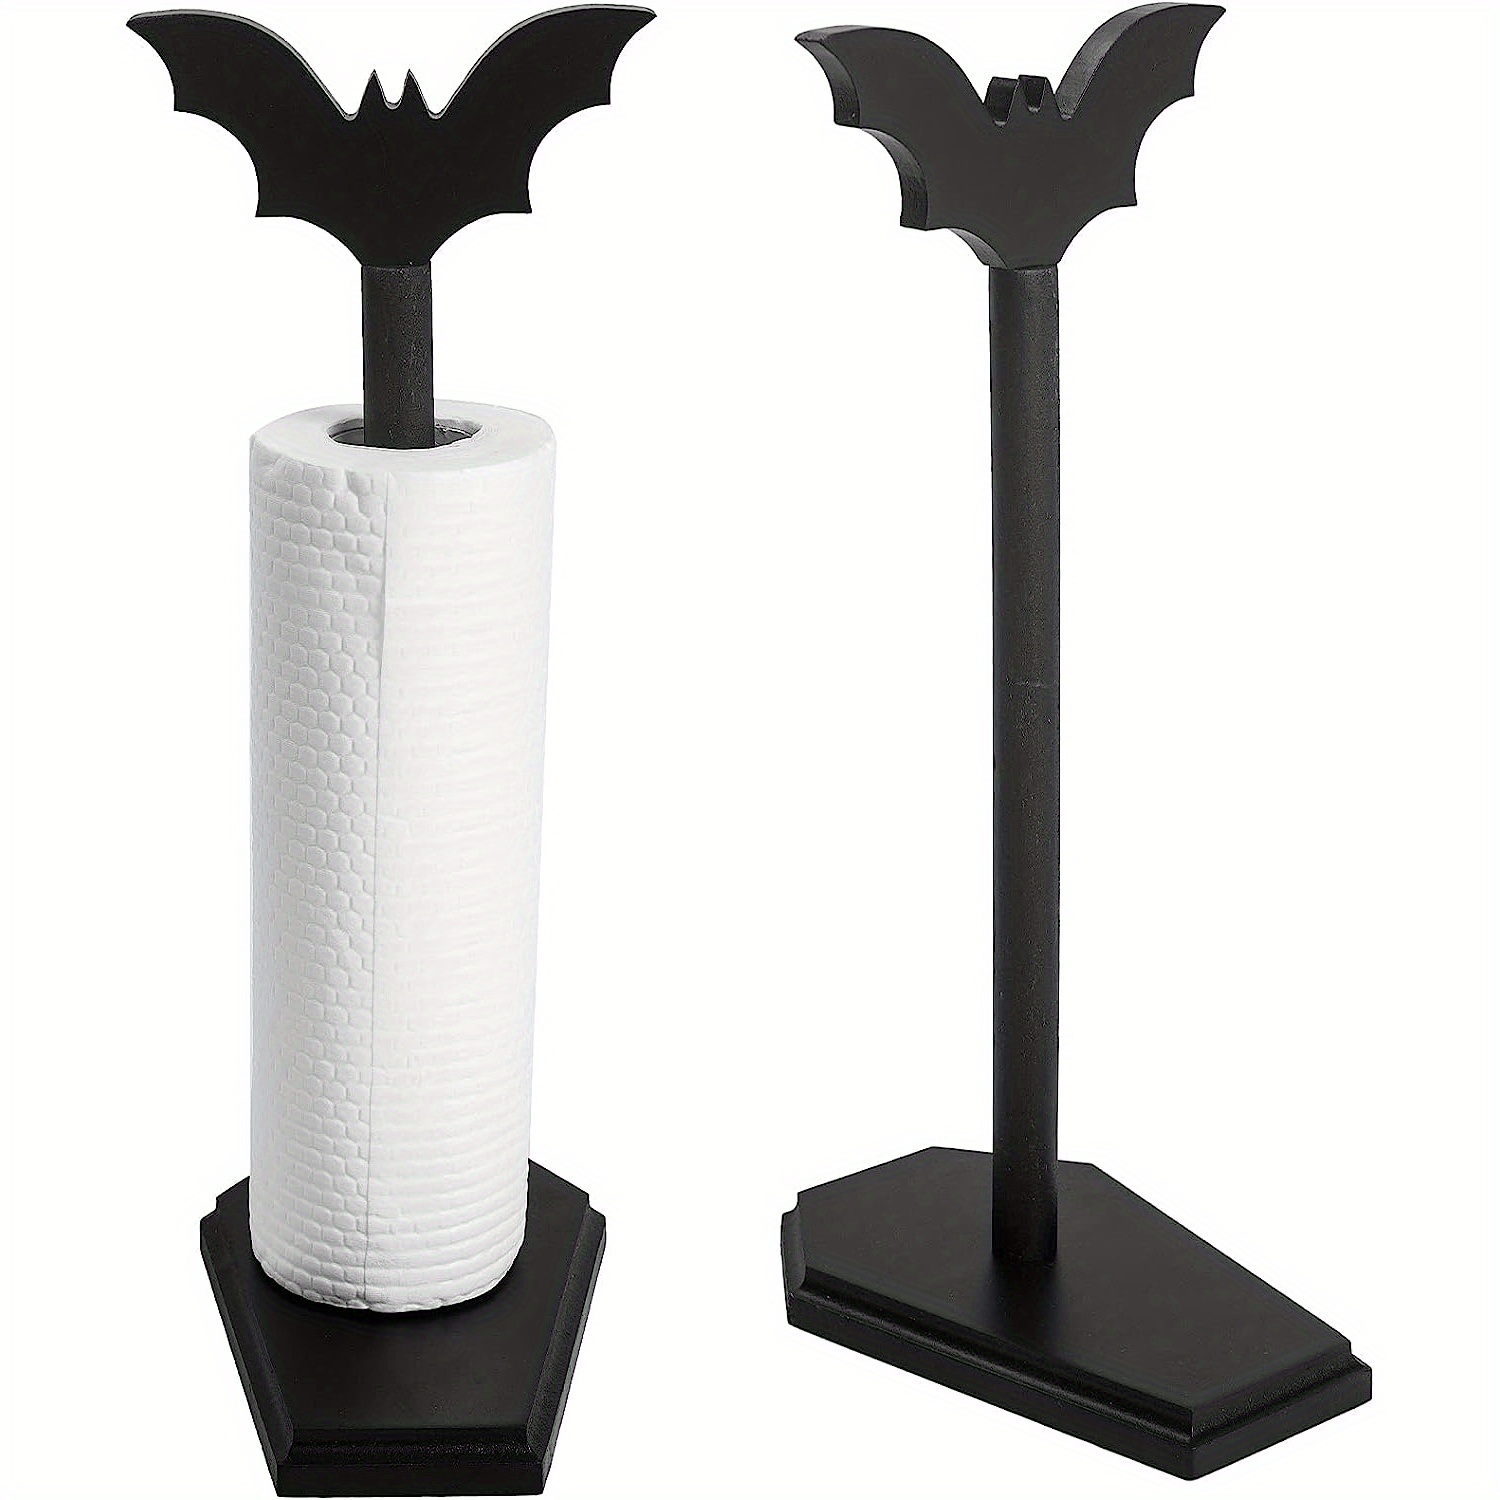 1pc Bat Paper Towel Holder, Halloween Decor For Kitchen And Bathroom, Gothic Home Decor For Oddities And Curiosities, Goth Accessories For Countertop Stand, Witchy Gifts For Women